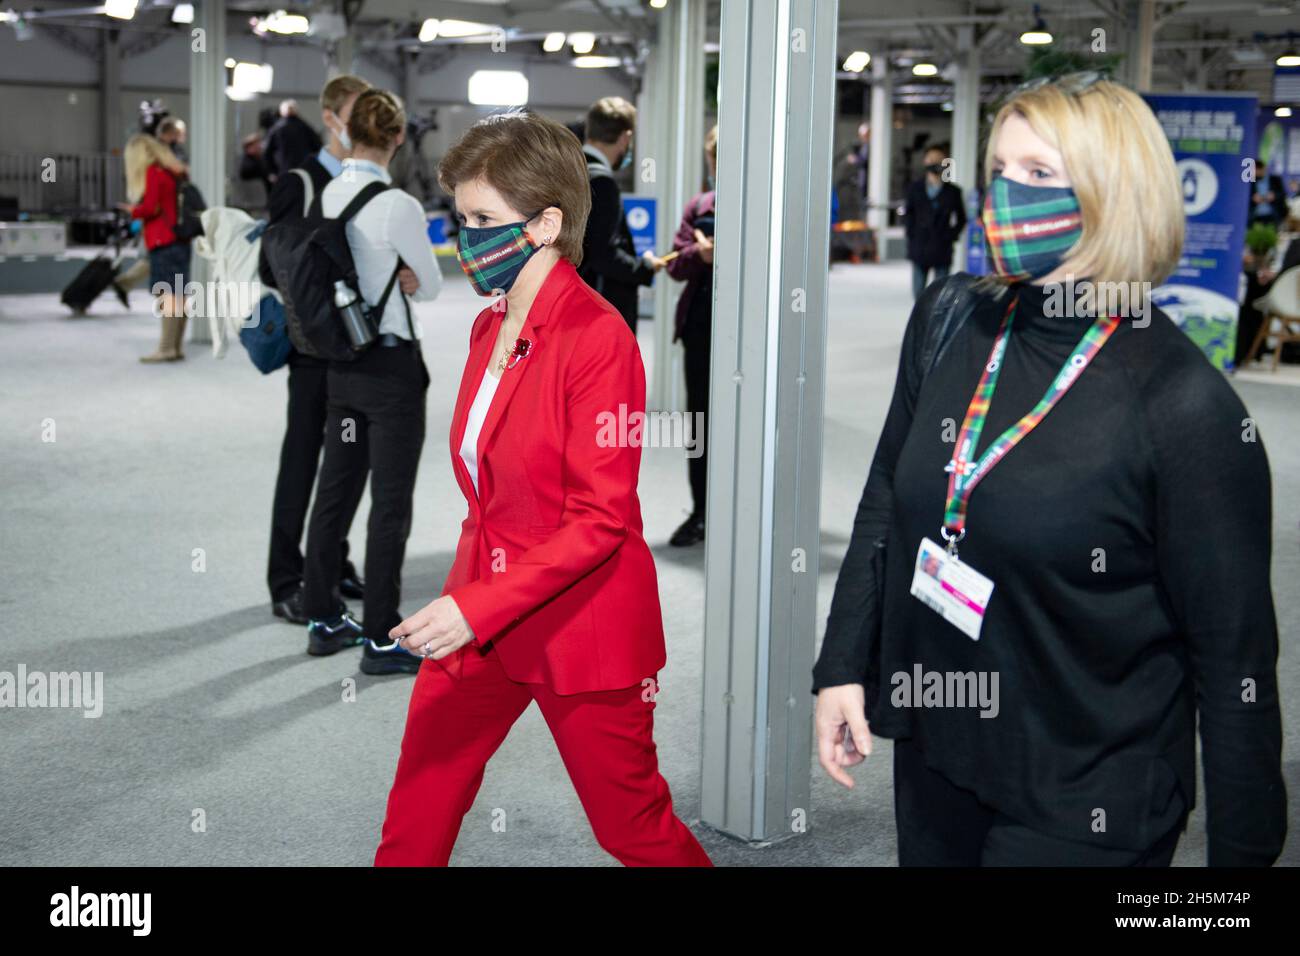 Glasgow, Scotland, UK. 10th Nov, 2021. PICTURED: Nicola Sturgeon MSP - First Minister of Scotland, spotted in the foyer at COP26 Climate Change Conference. Credit: Colin Fisher/Alamy Live News Stock Photo